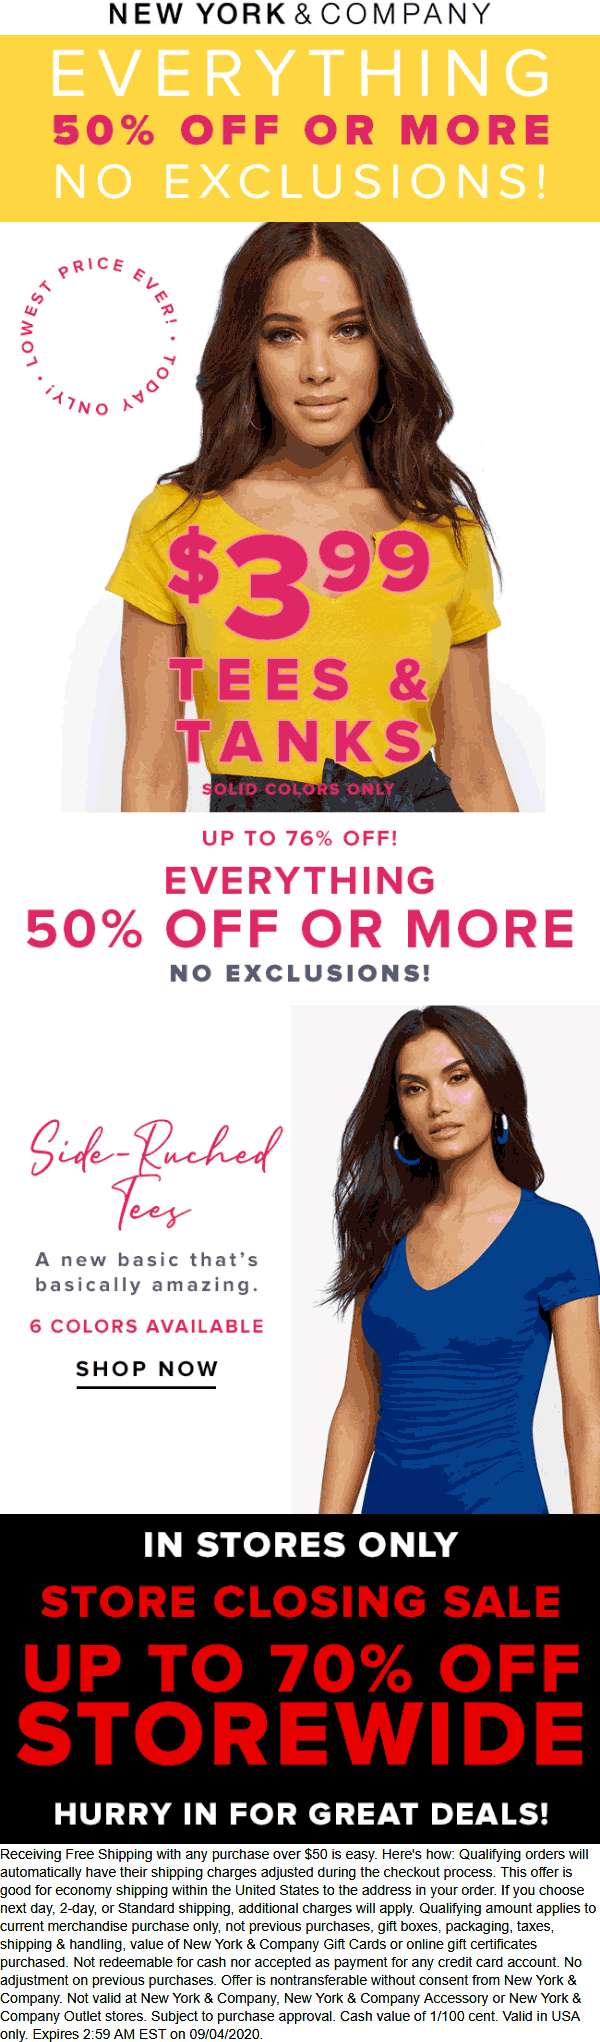 50 off everything online at New York & Company + 70 off store closing